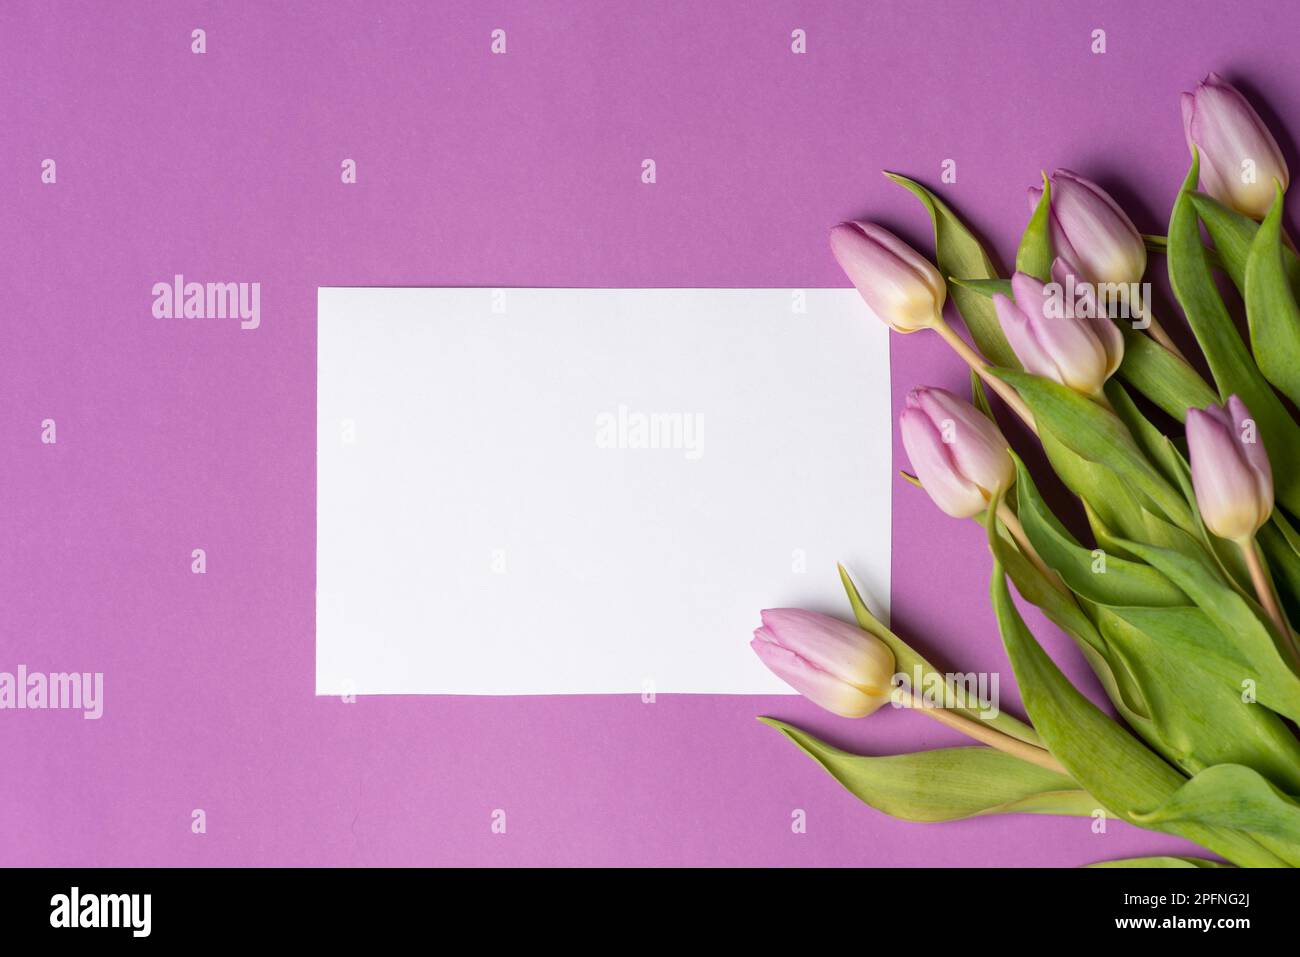 Purple tulips with empty note card on matching purple background arrangement top view flat lay with copy space Stock Photo